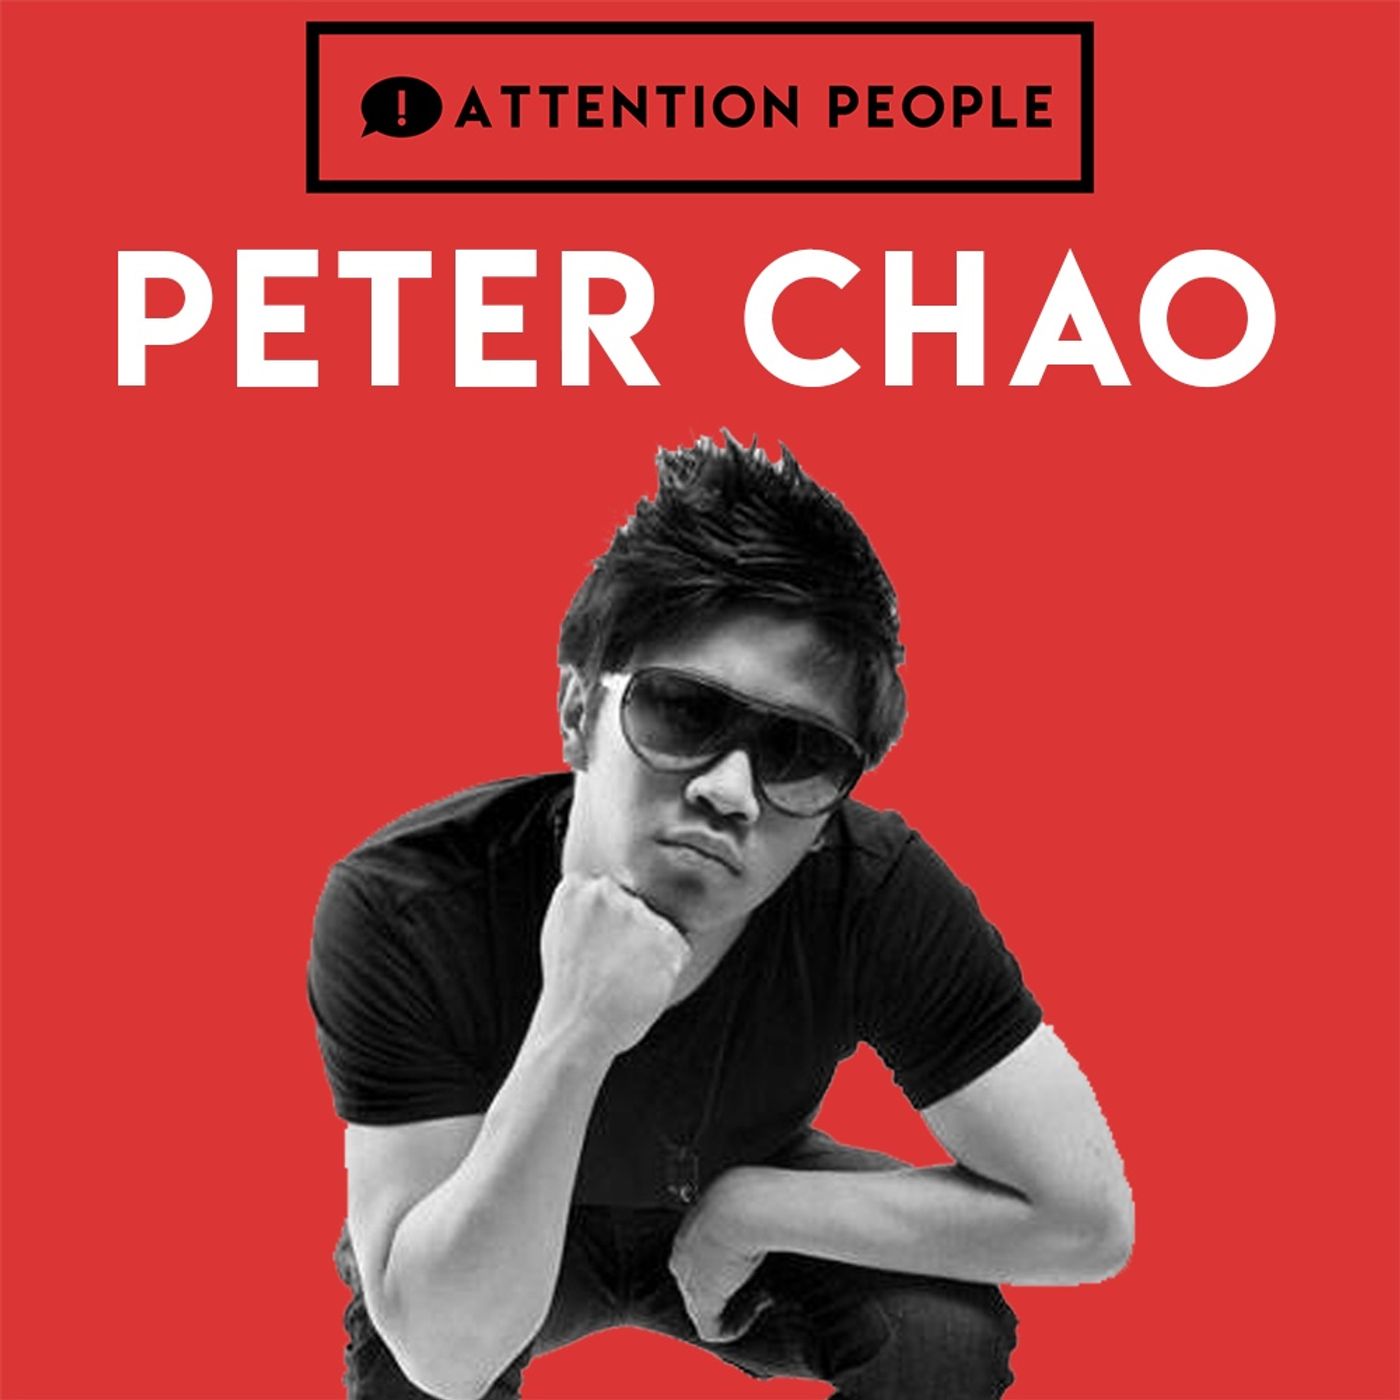 Peter Chao - Going Viral & Culture Comedy. The YouTube OG.